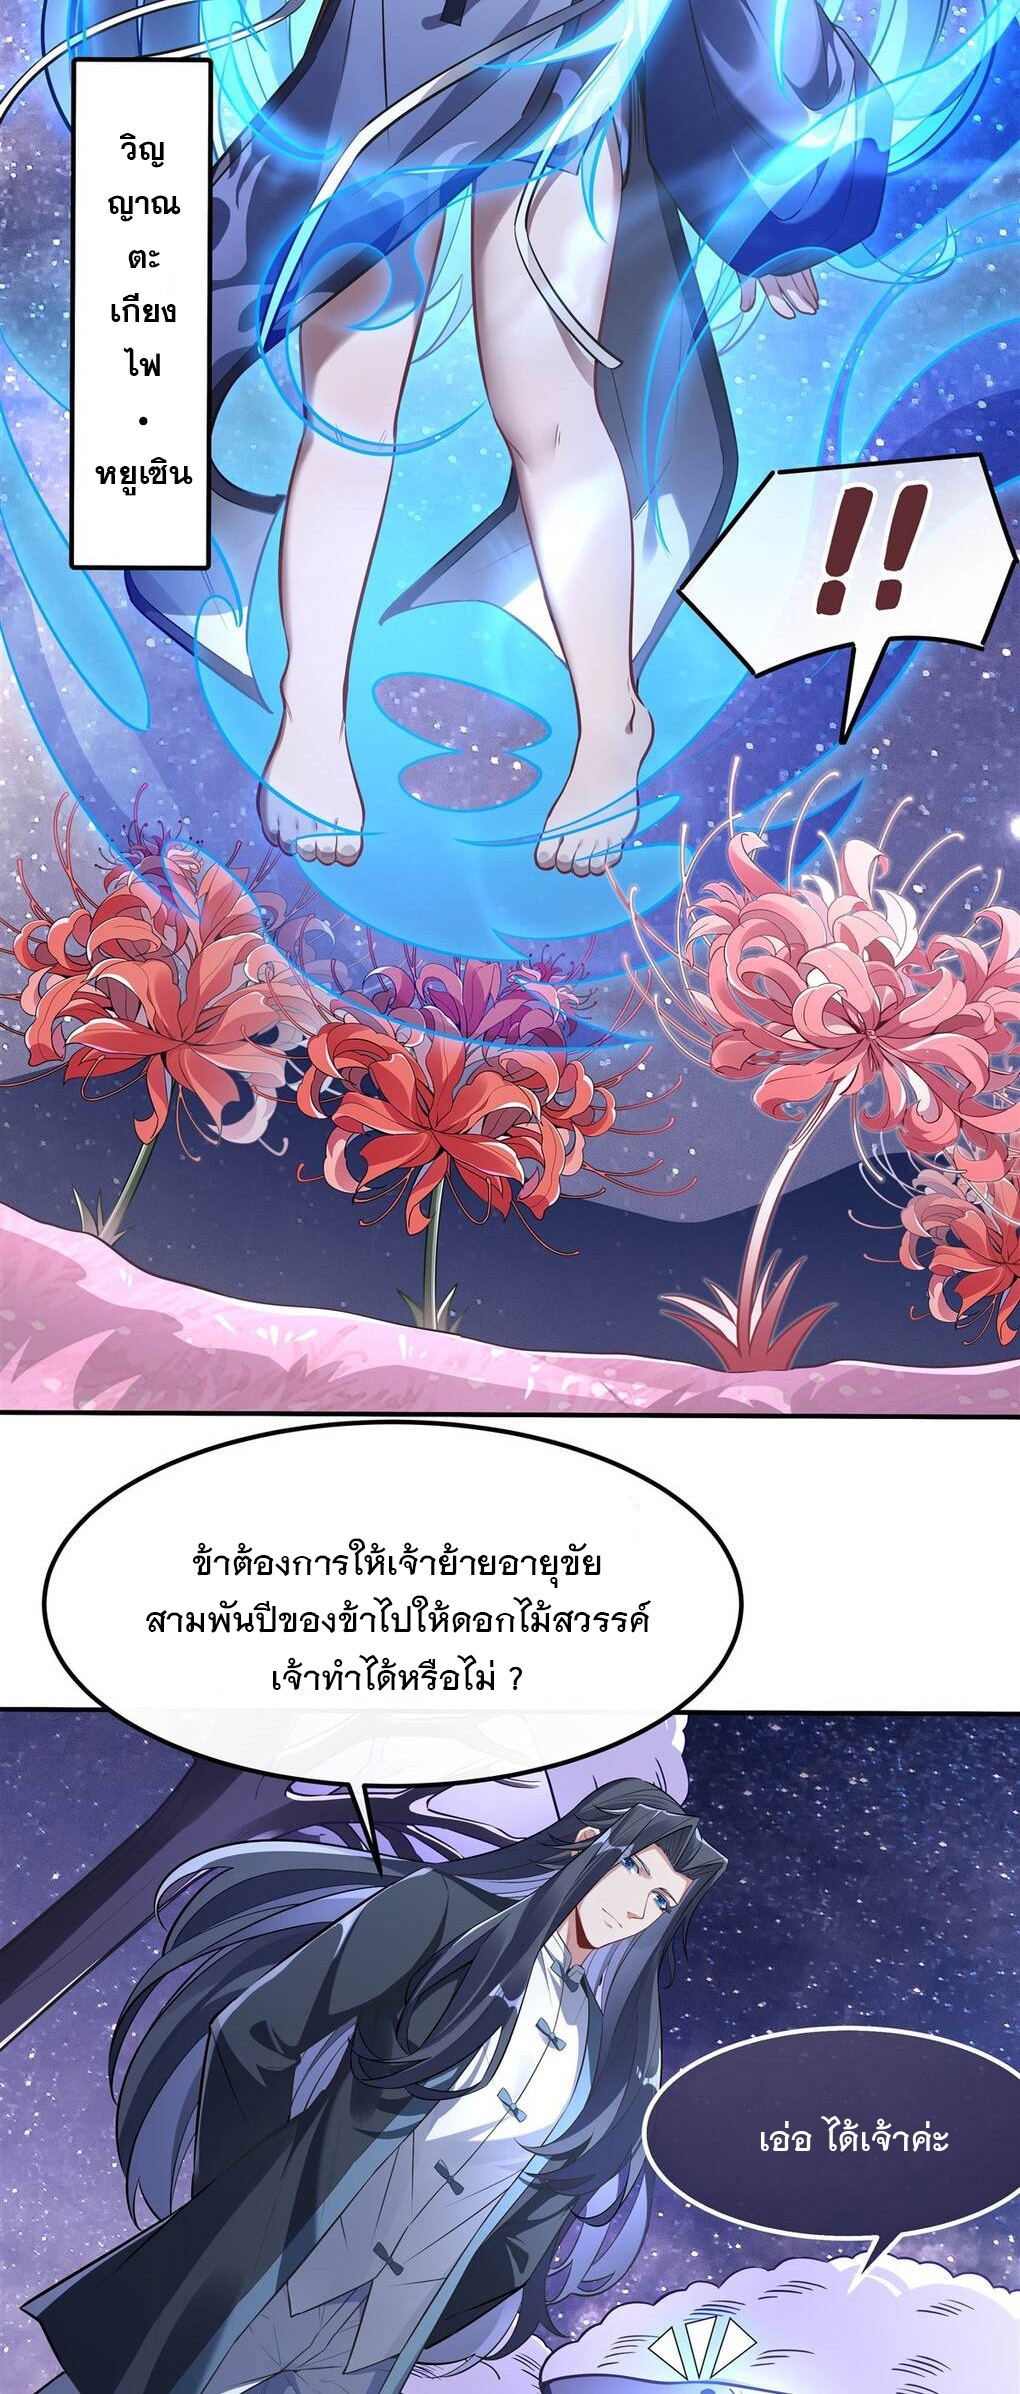 My Female Apprentices Are All Big Shots From the Future Ã Â¸â€¢Ã Â¸Â­Ã Â¸â„¢Ã Â¸â€”Ã Â¸ÂµÃ Â¹Ë† 92 (26)